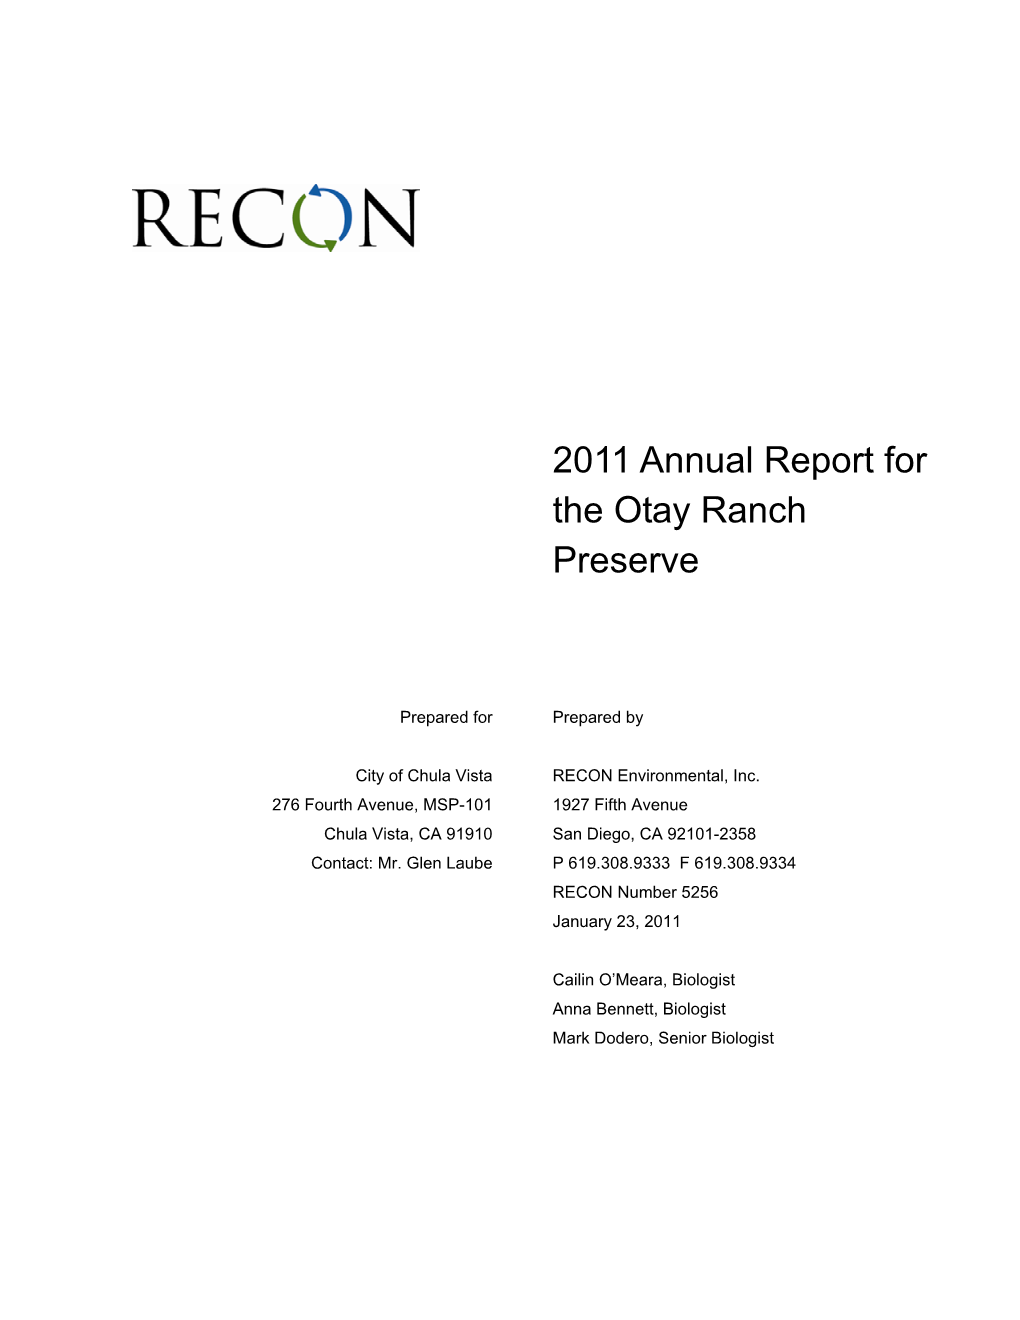 2011 Annual Report for the Otay Ranch Preserve